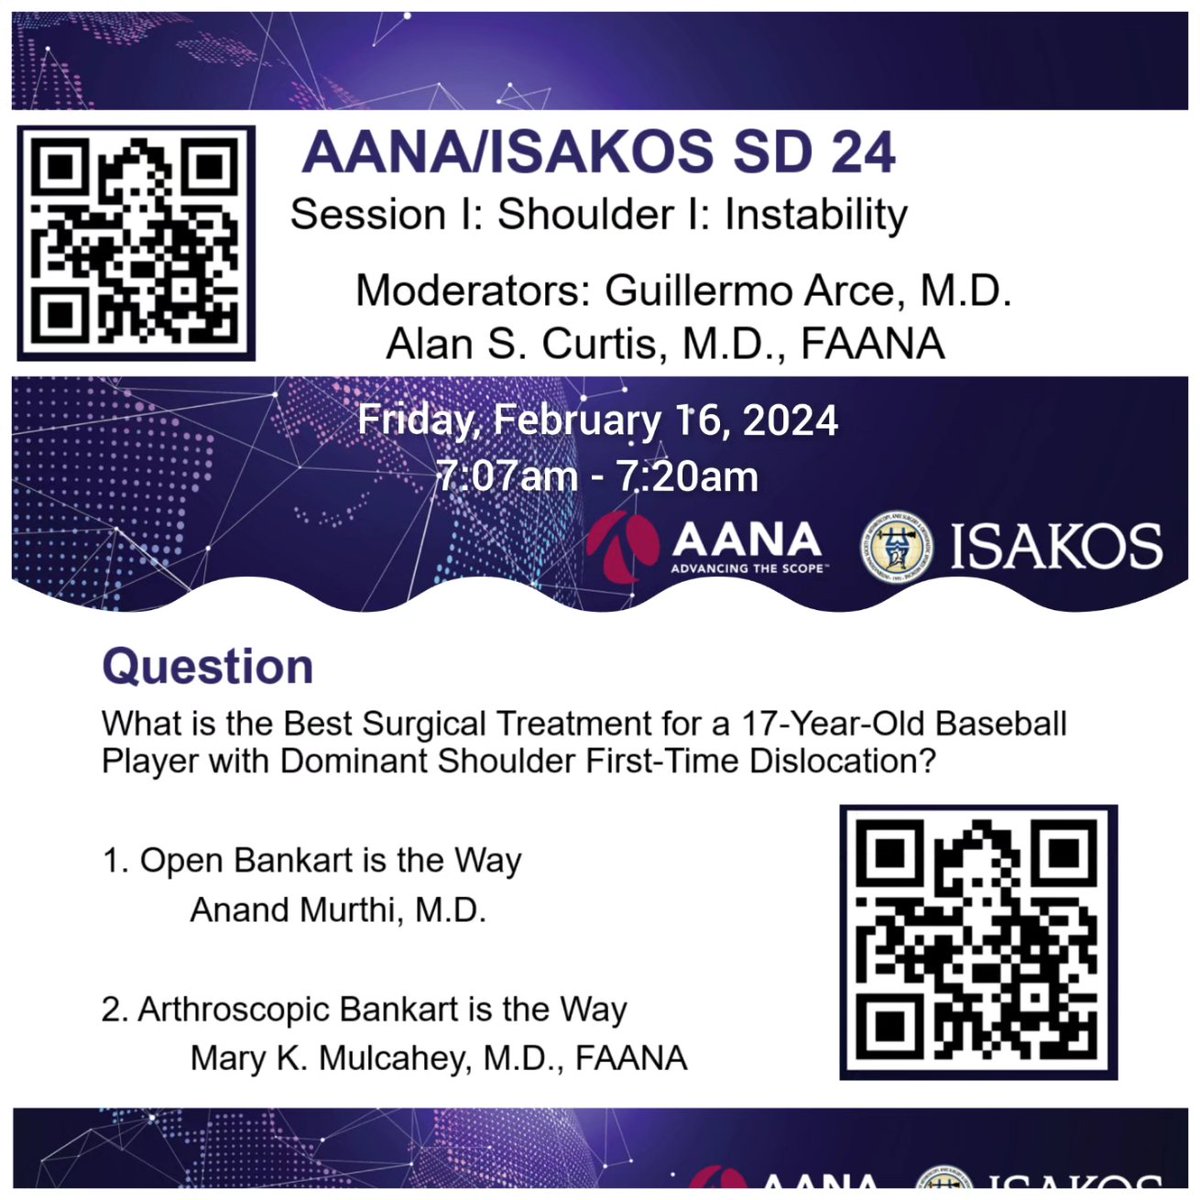 Two days until the start of #AAOS2024! Looking forward to reconnecting with many friends & colleagues, meeting new people, and participating in several engaging sessions. See you in San Francisco! #orthotwitter @LoyolaOrthoRes